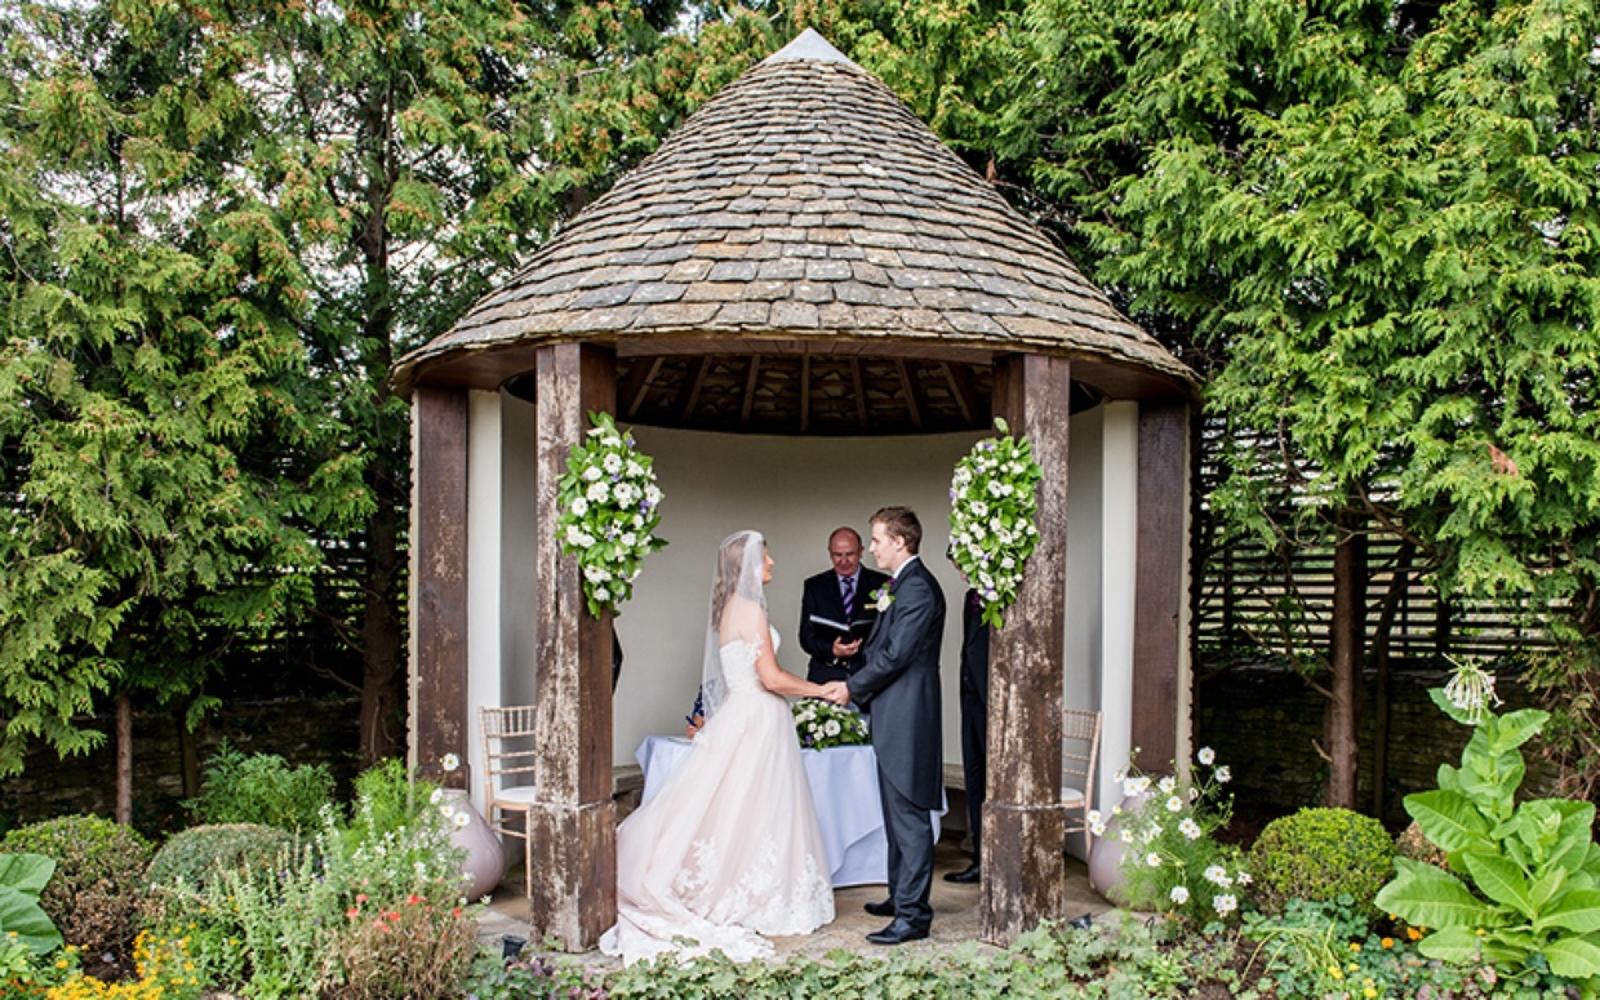 Real Wedding from Whitewed Directory approved wedding photographer duo of Cirencester Capture Every Moment intimate outdoor wedding ceremony Whatley Manor